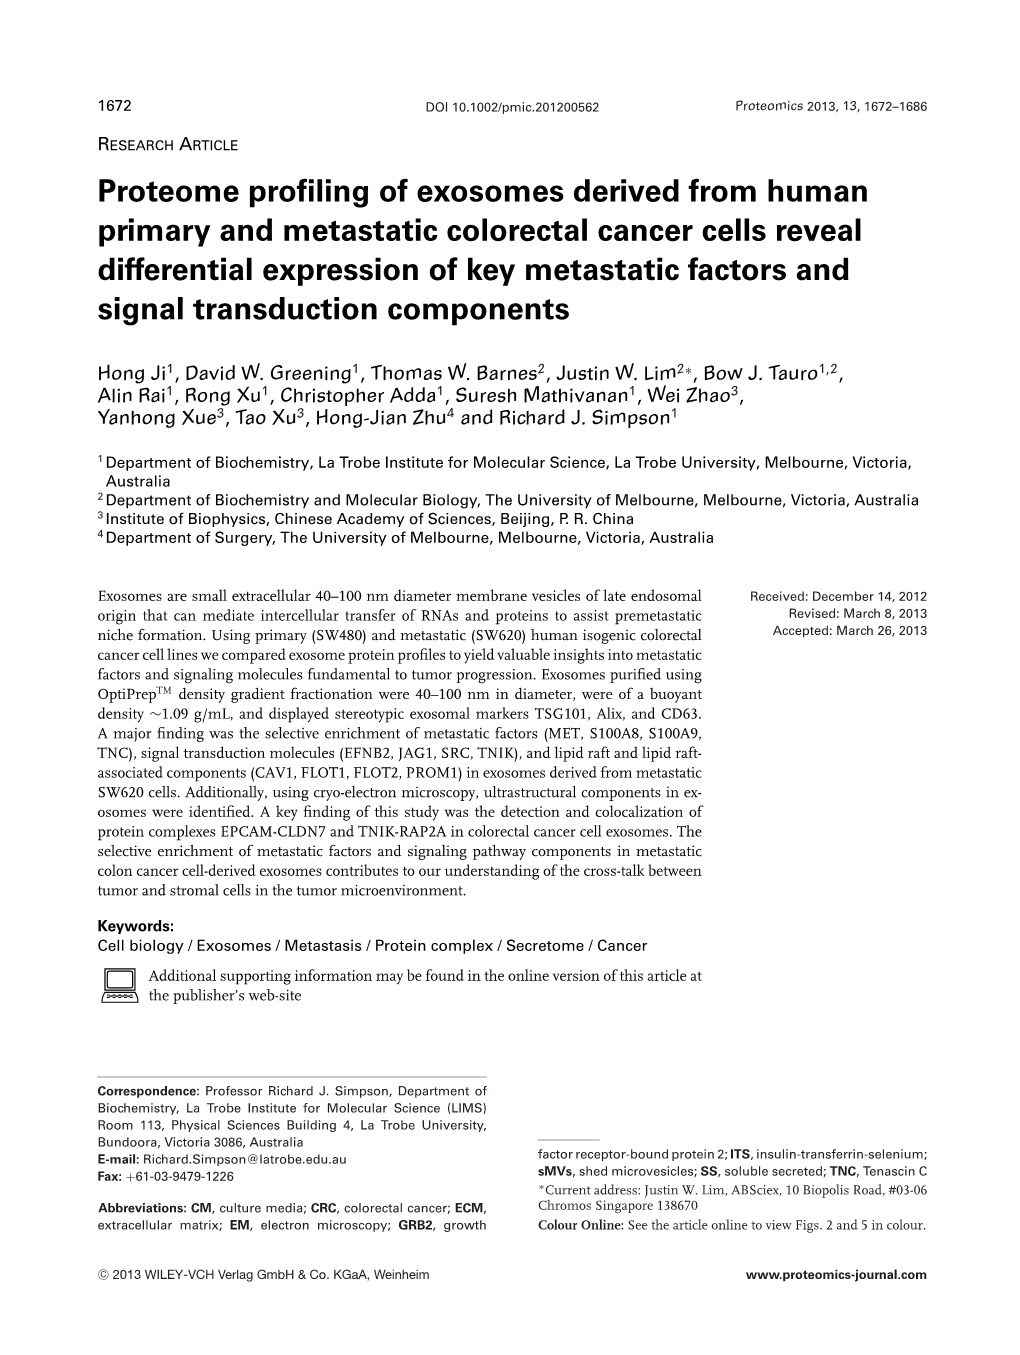 Proteome Profiling of Exosomes Derived from Human Primary And